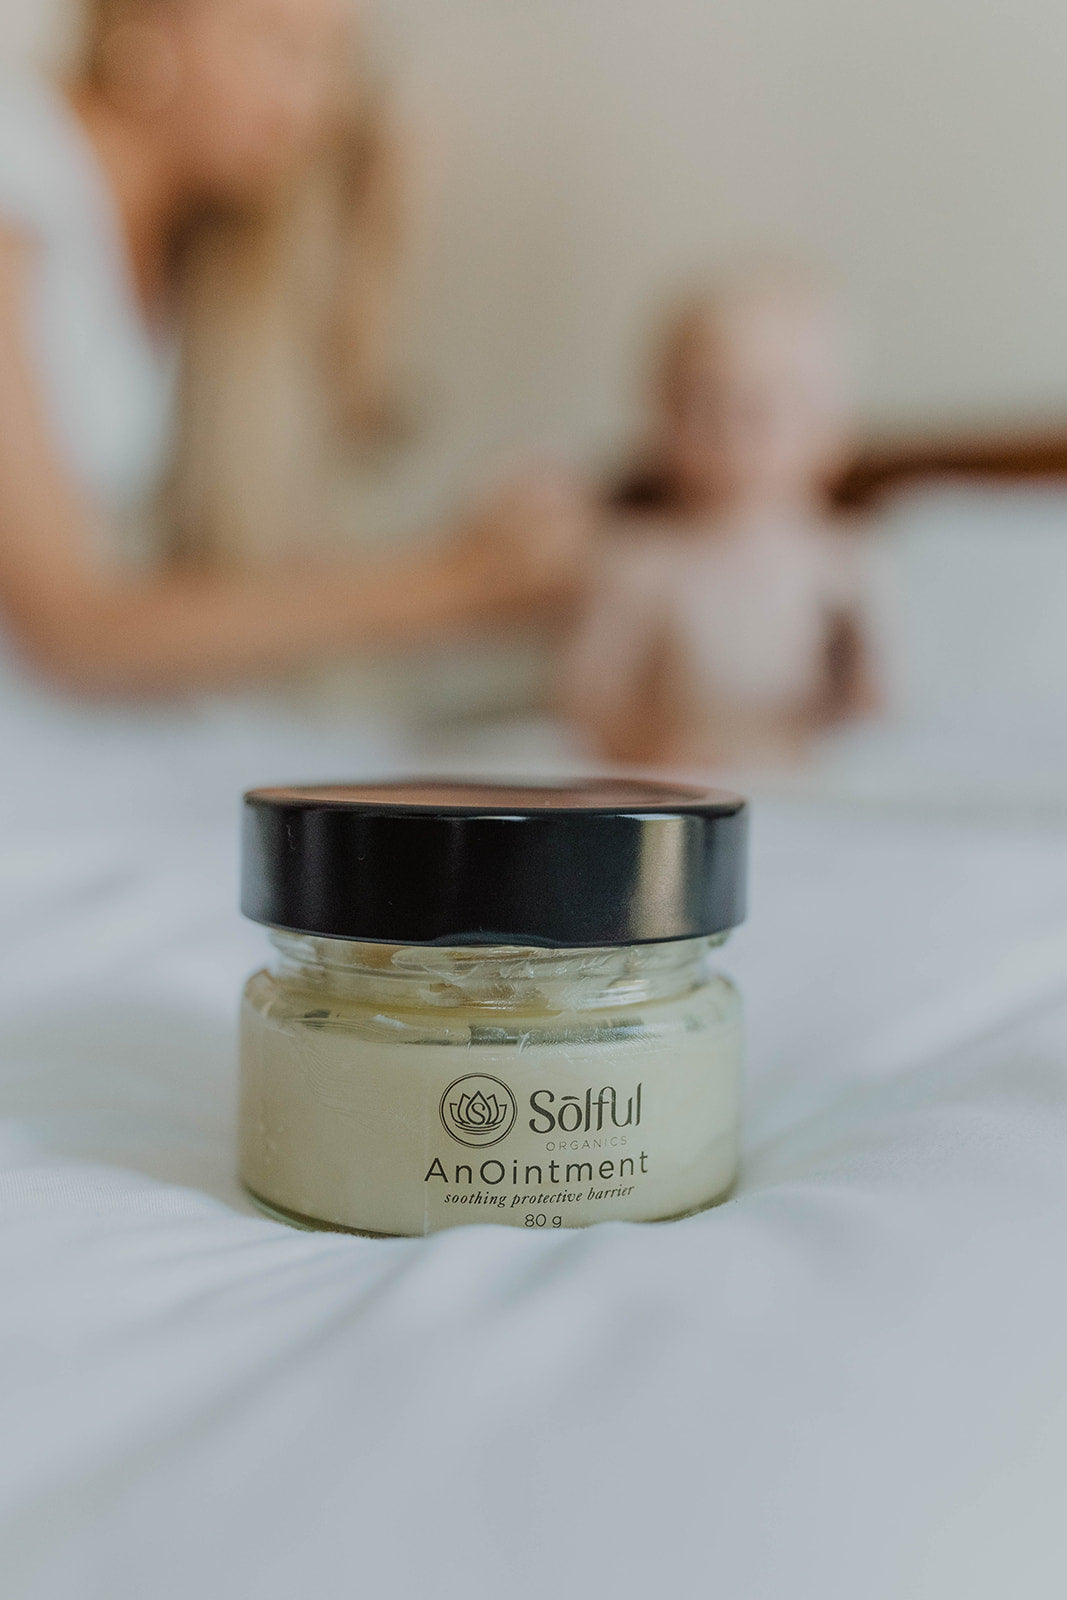 Solful Organics AnOintment - soothing non-petroleum jelly